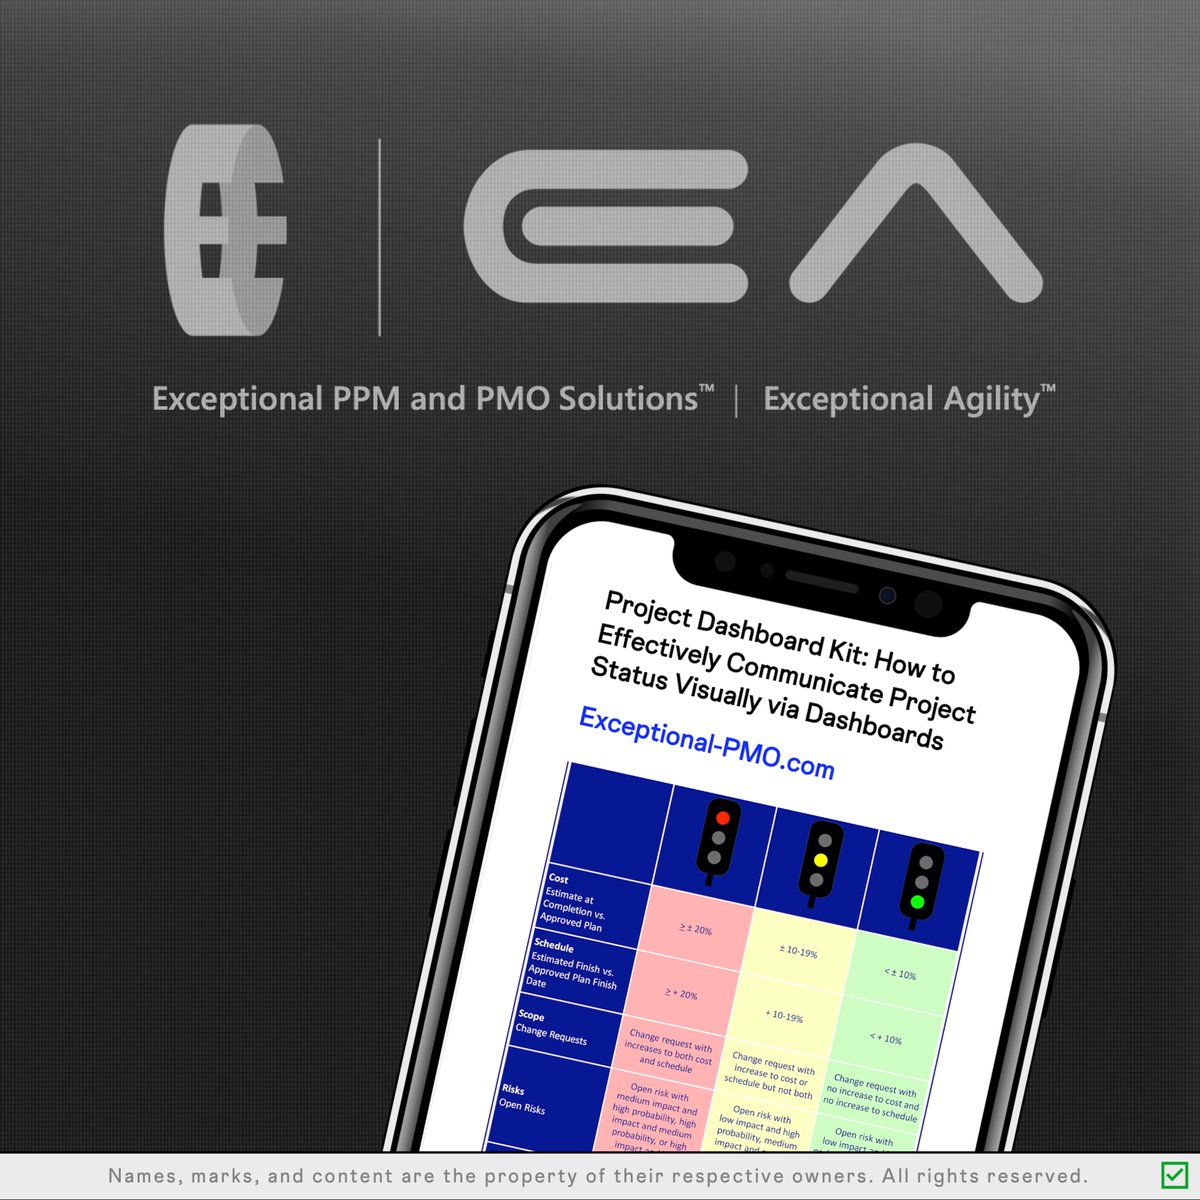 Project Dashboard Kit from Exceptional-PMO.com and ExceptionalAgility.com is here 👉Exceptional-PMO.com/blog/files/Inf…

#Agile #Project #ProjectManagement #Dashboard #ProjectDashboard #Visualization #ExceptionalAgility #PMOT